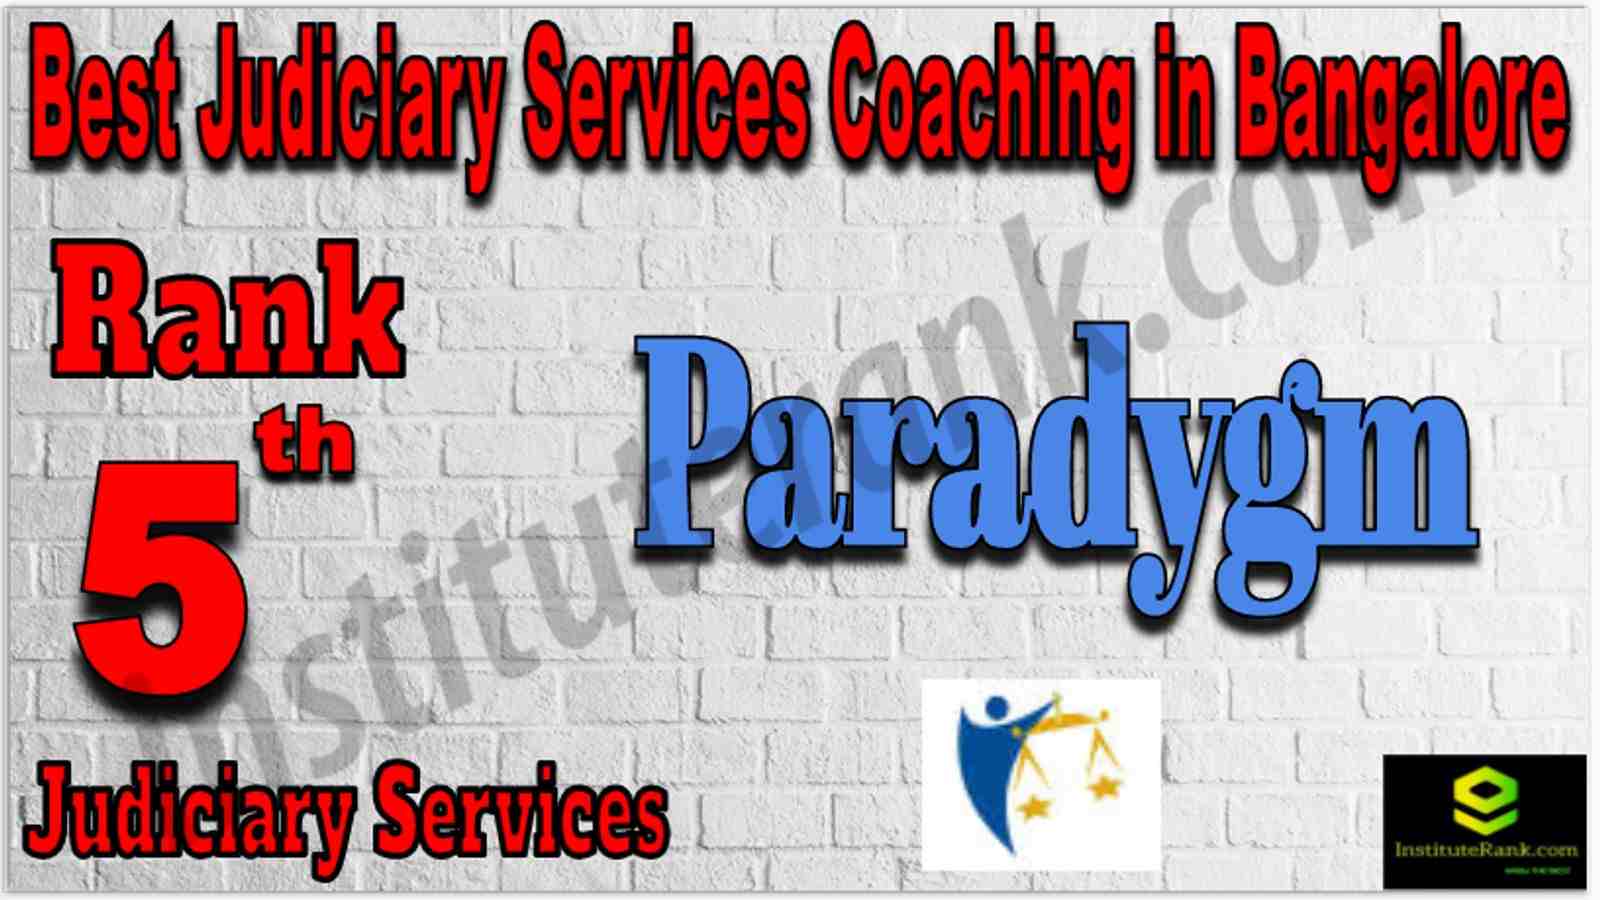 Rank 5 Best Judiciary Services Coaching in Bangalore